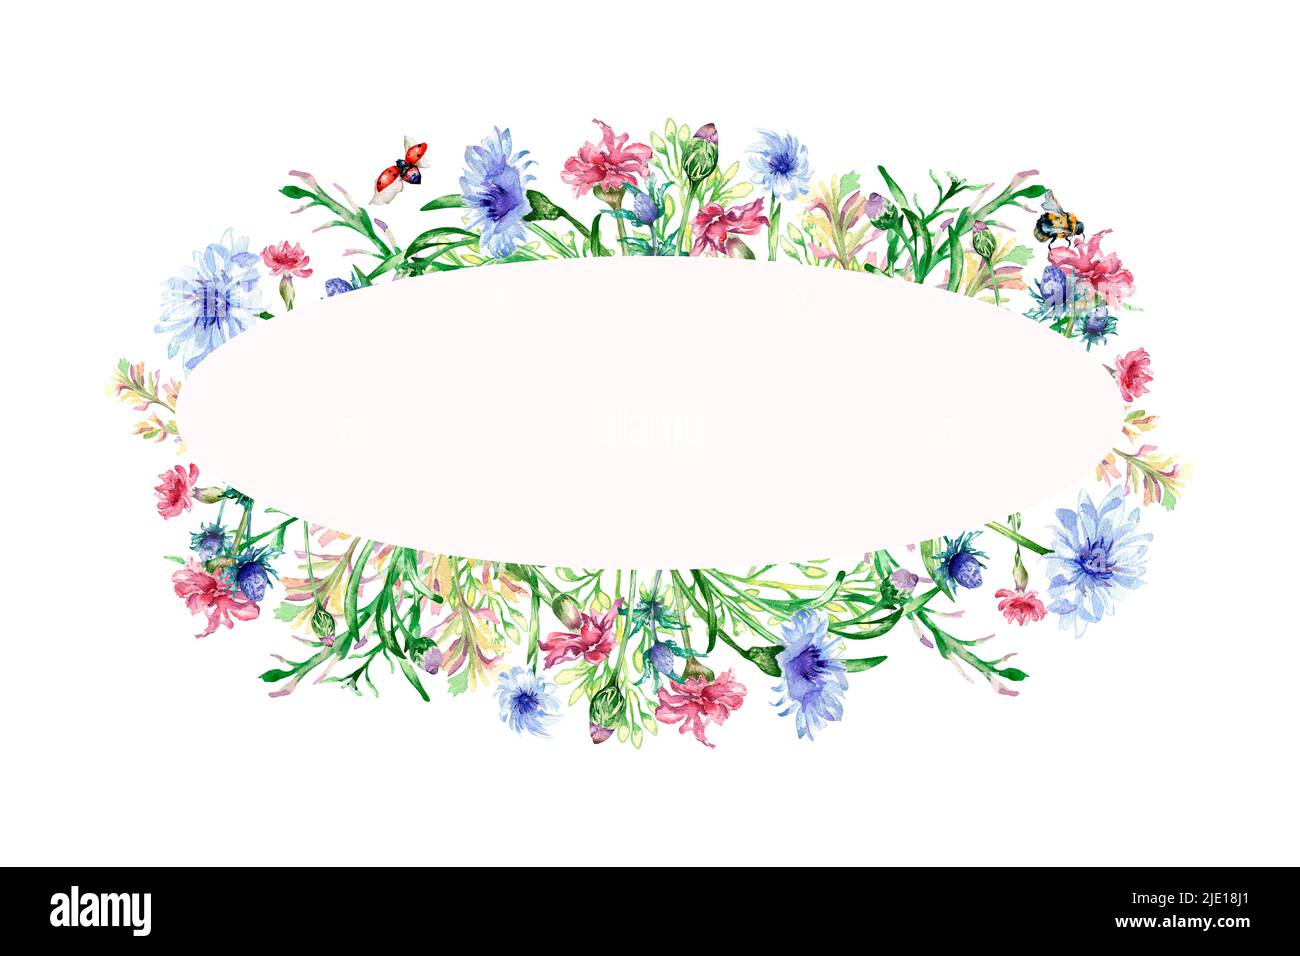 Frame with meadow colorful flowers, insects watercolor illustration isolated. Wildflowers, blue cornflower wreath hand painted. Design elements for gr Stock Photo